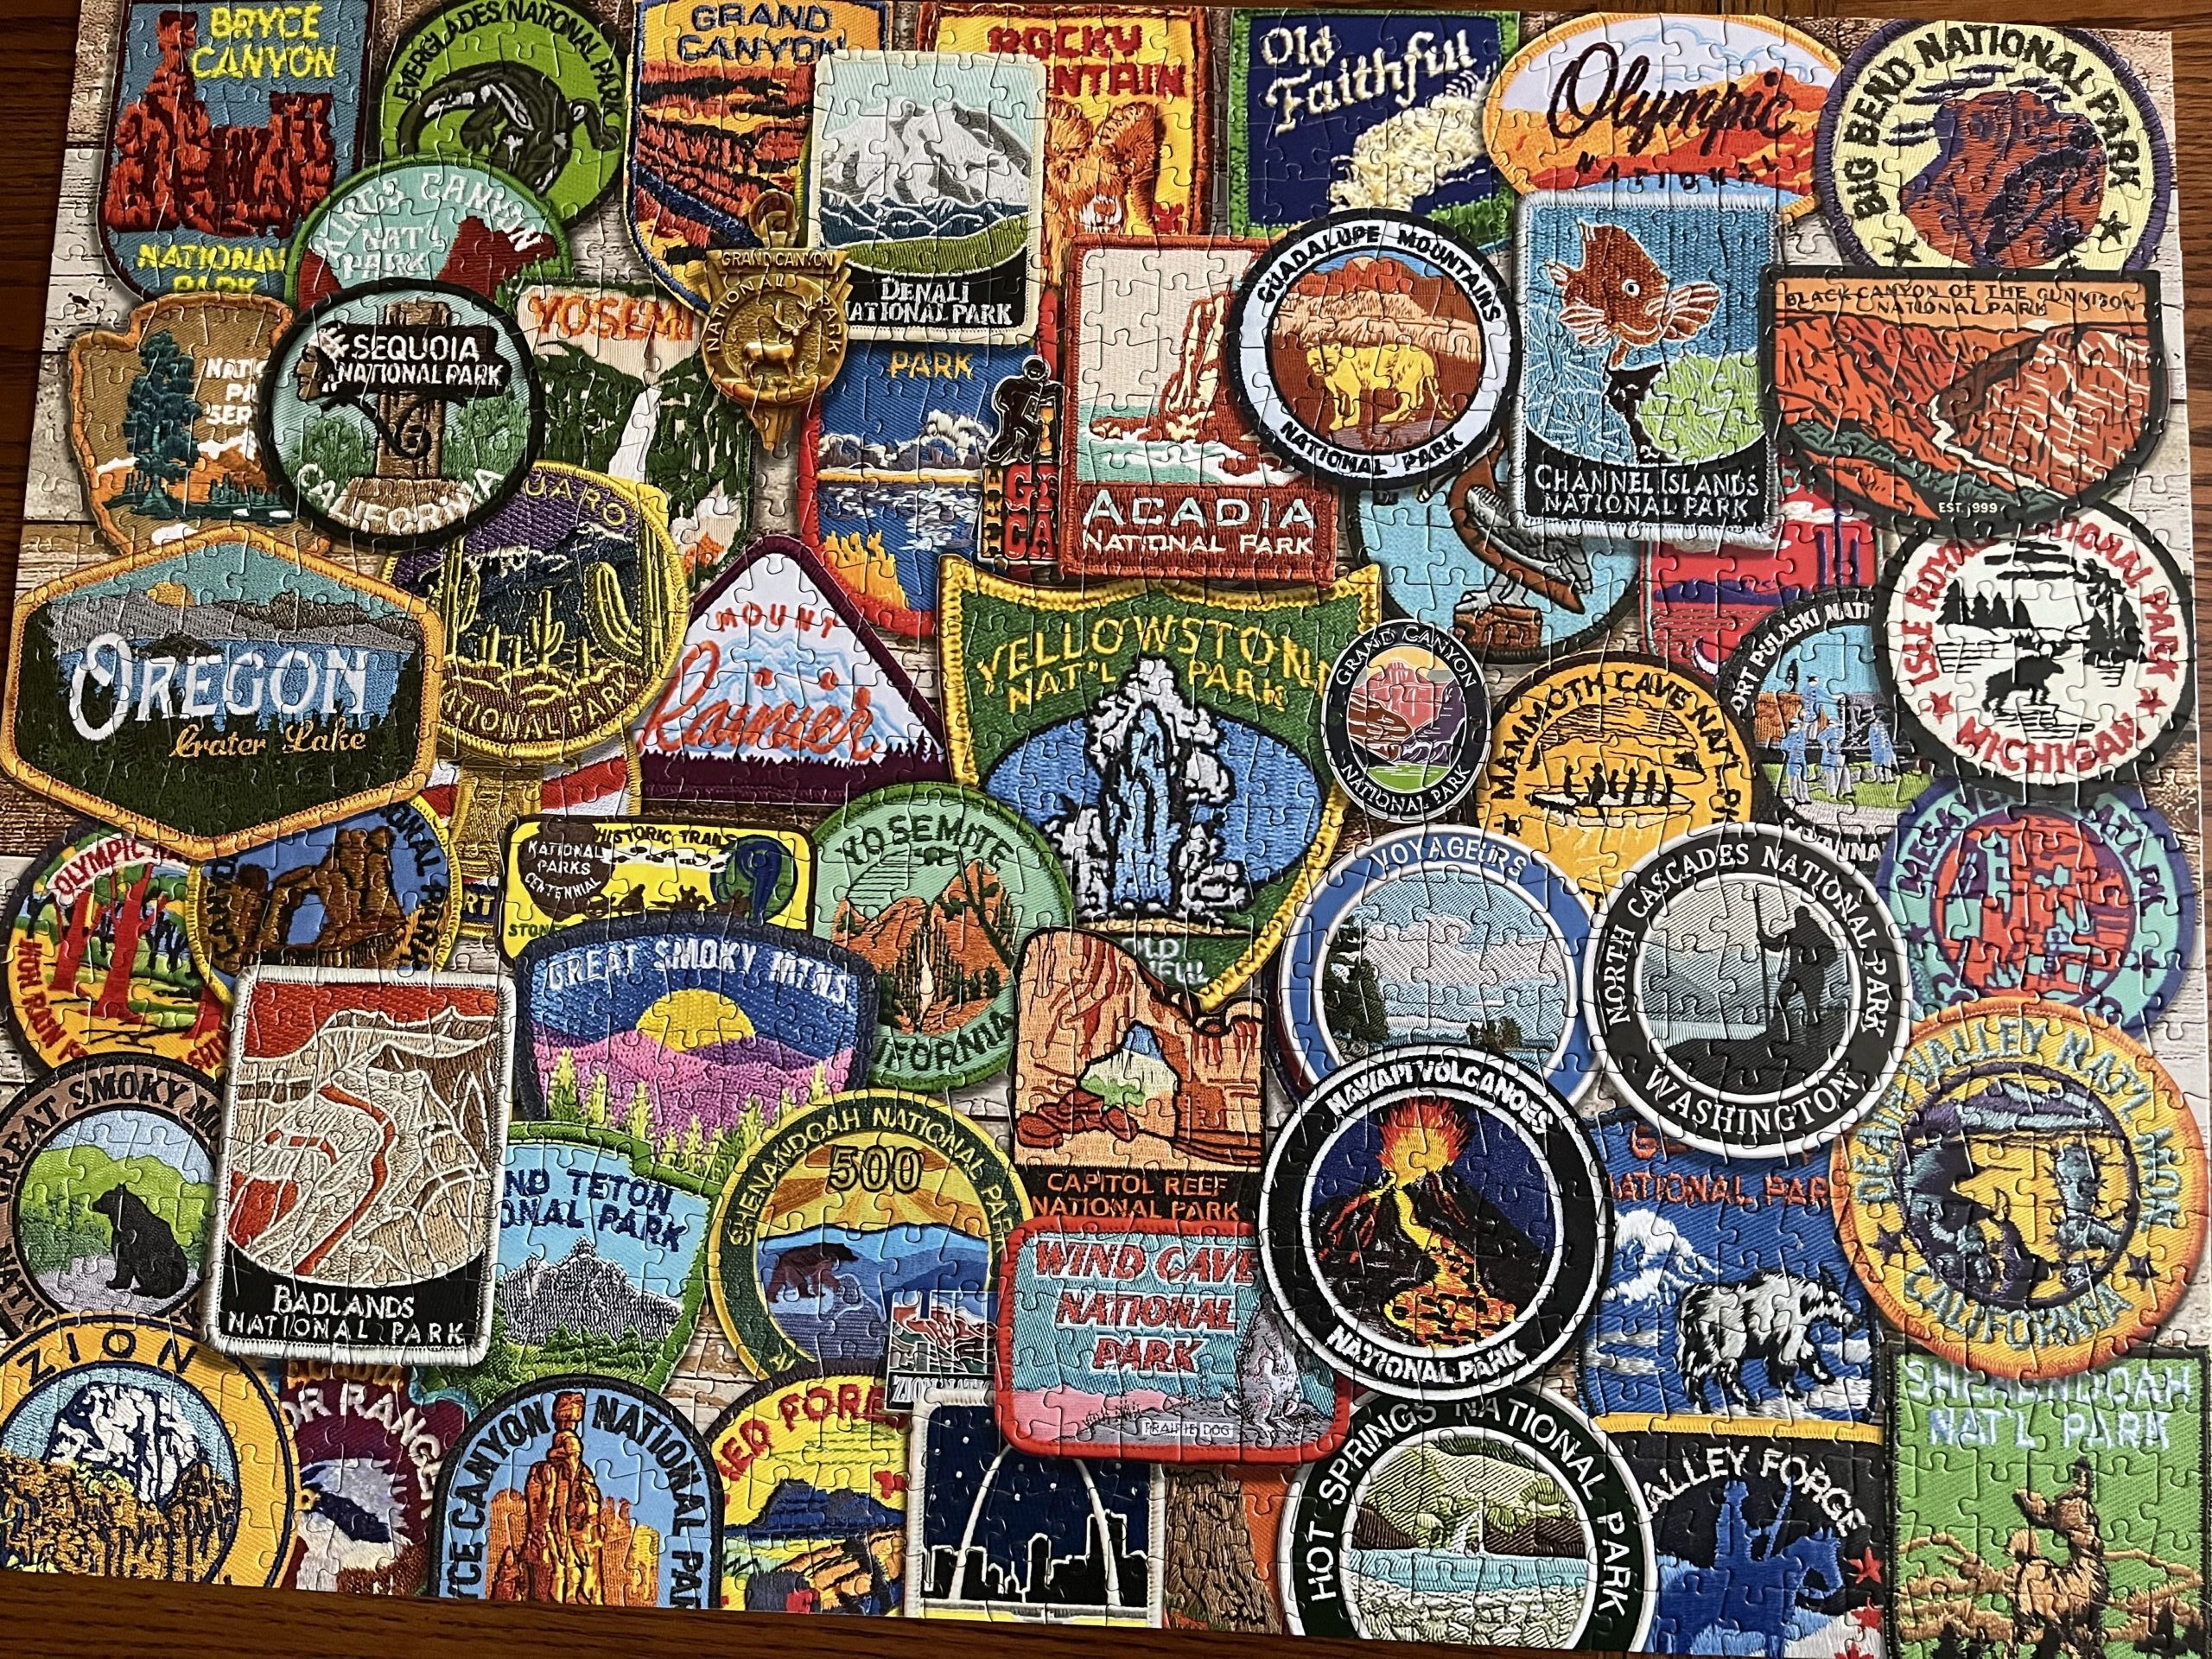 A puzzle showing multiple overlapping badges from many American national parks